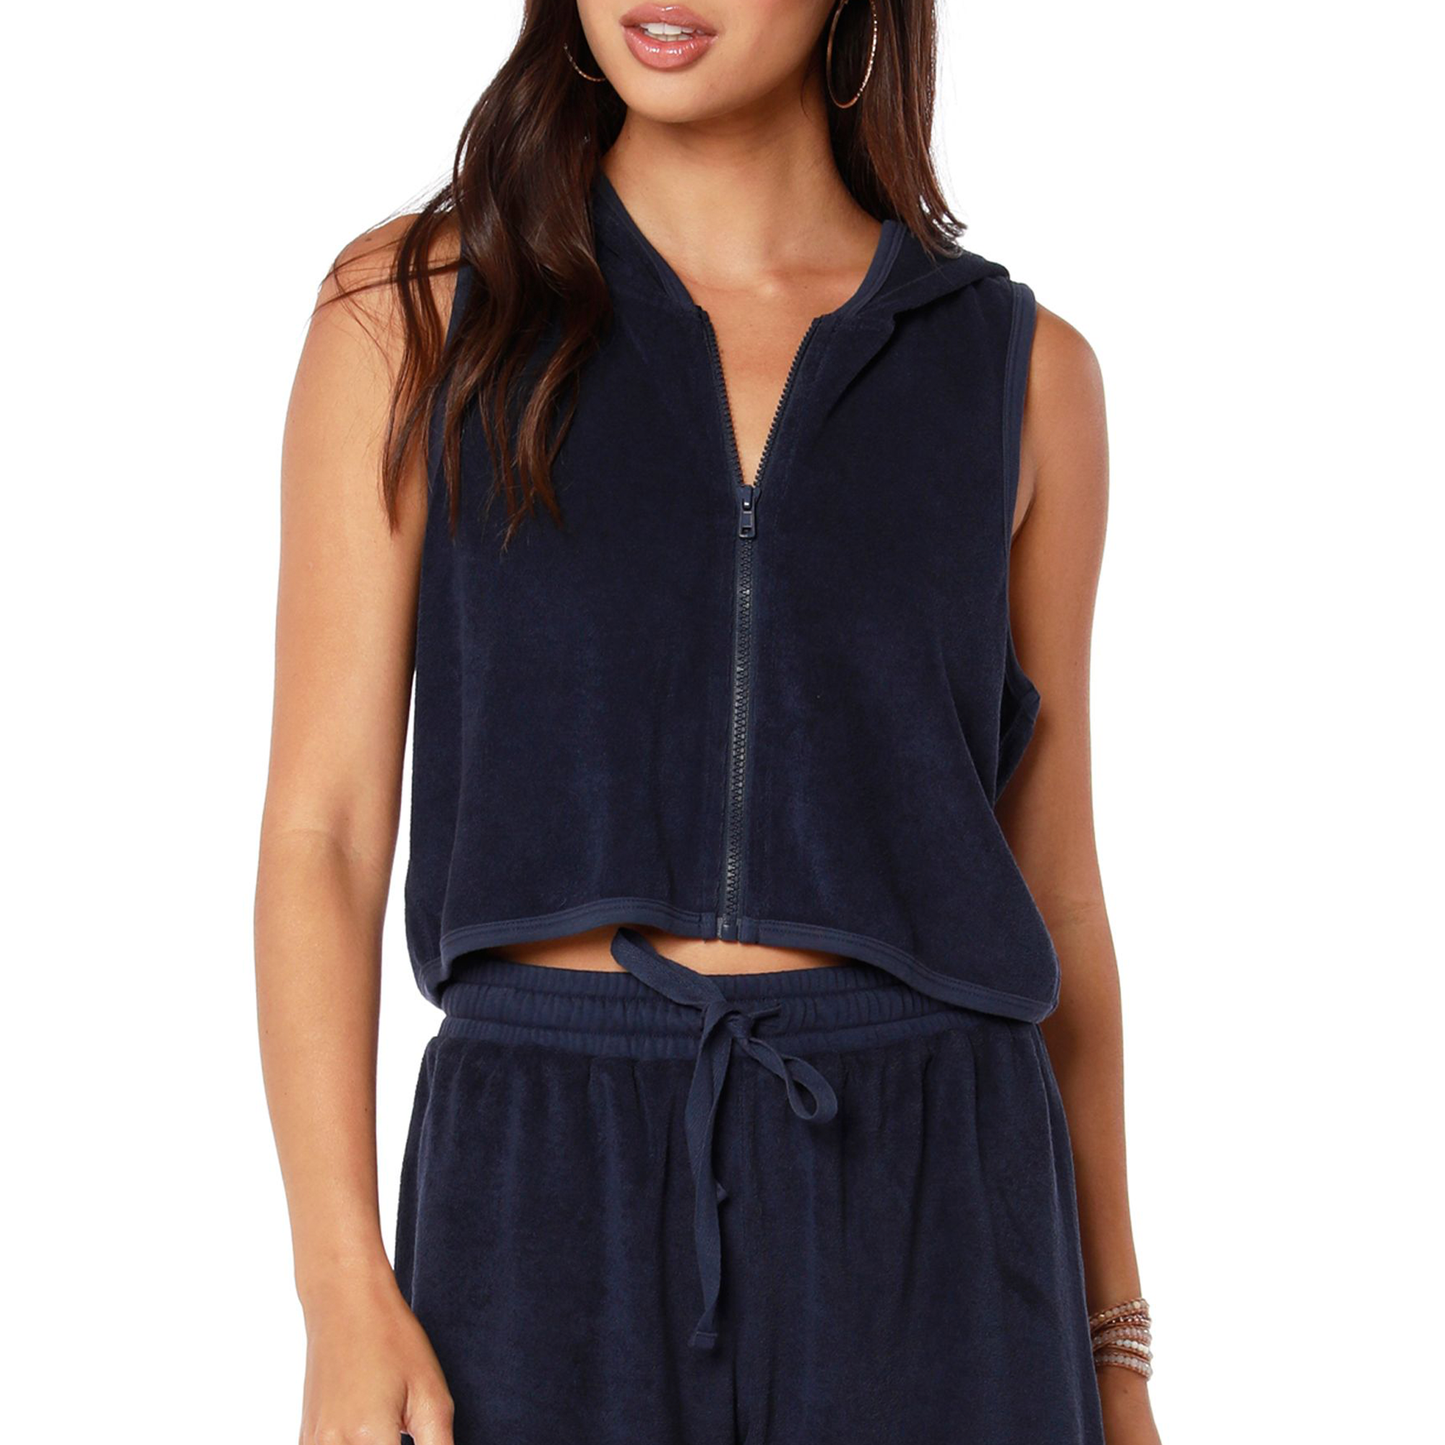 Bobi Hooded Zipper Vest. Perfectly put together. This hooded vest is an artful mix of style and comfortability. Wear on its own or use it as a layering piece for your warm day outfit